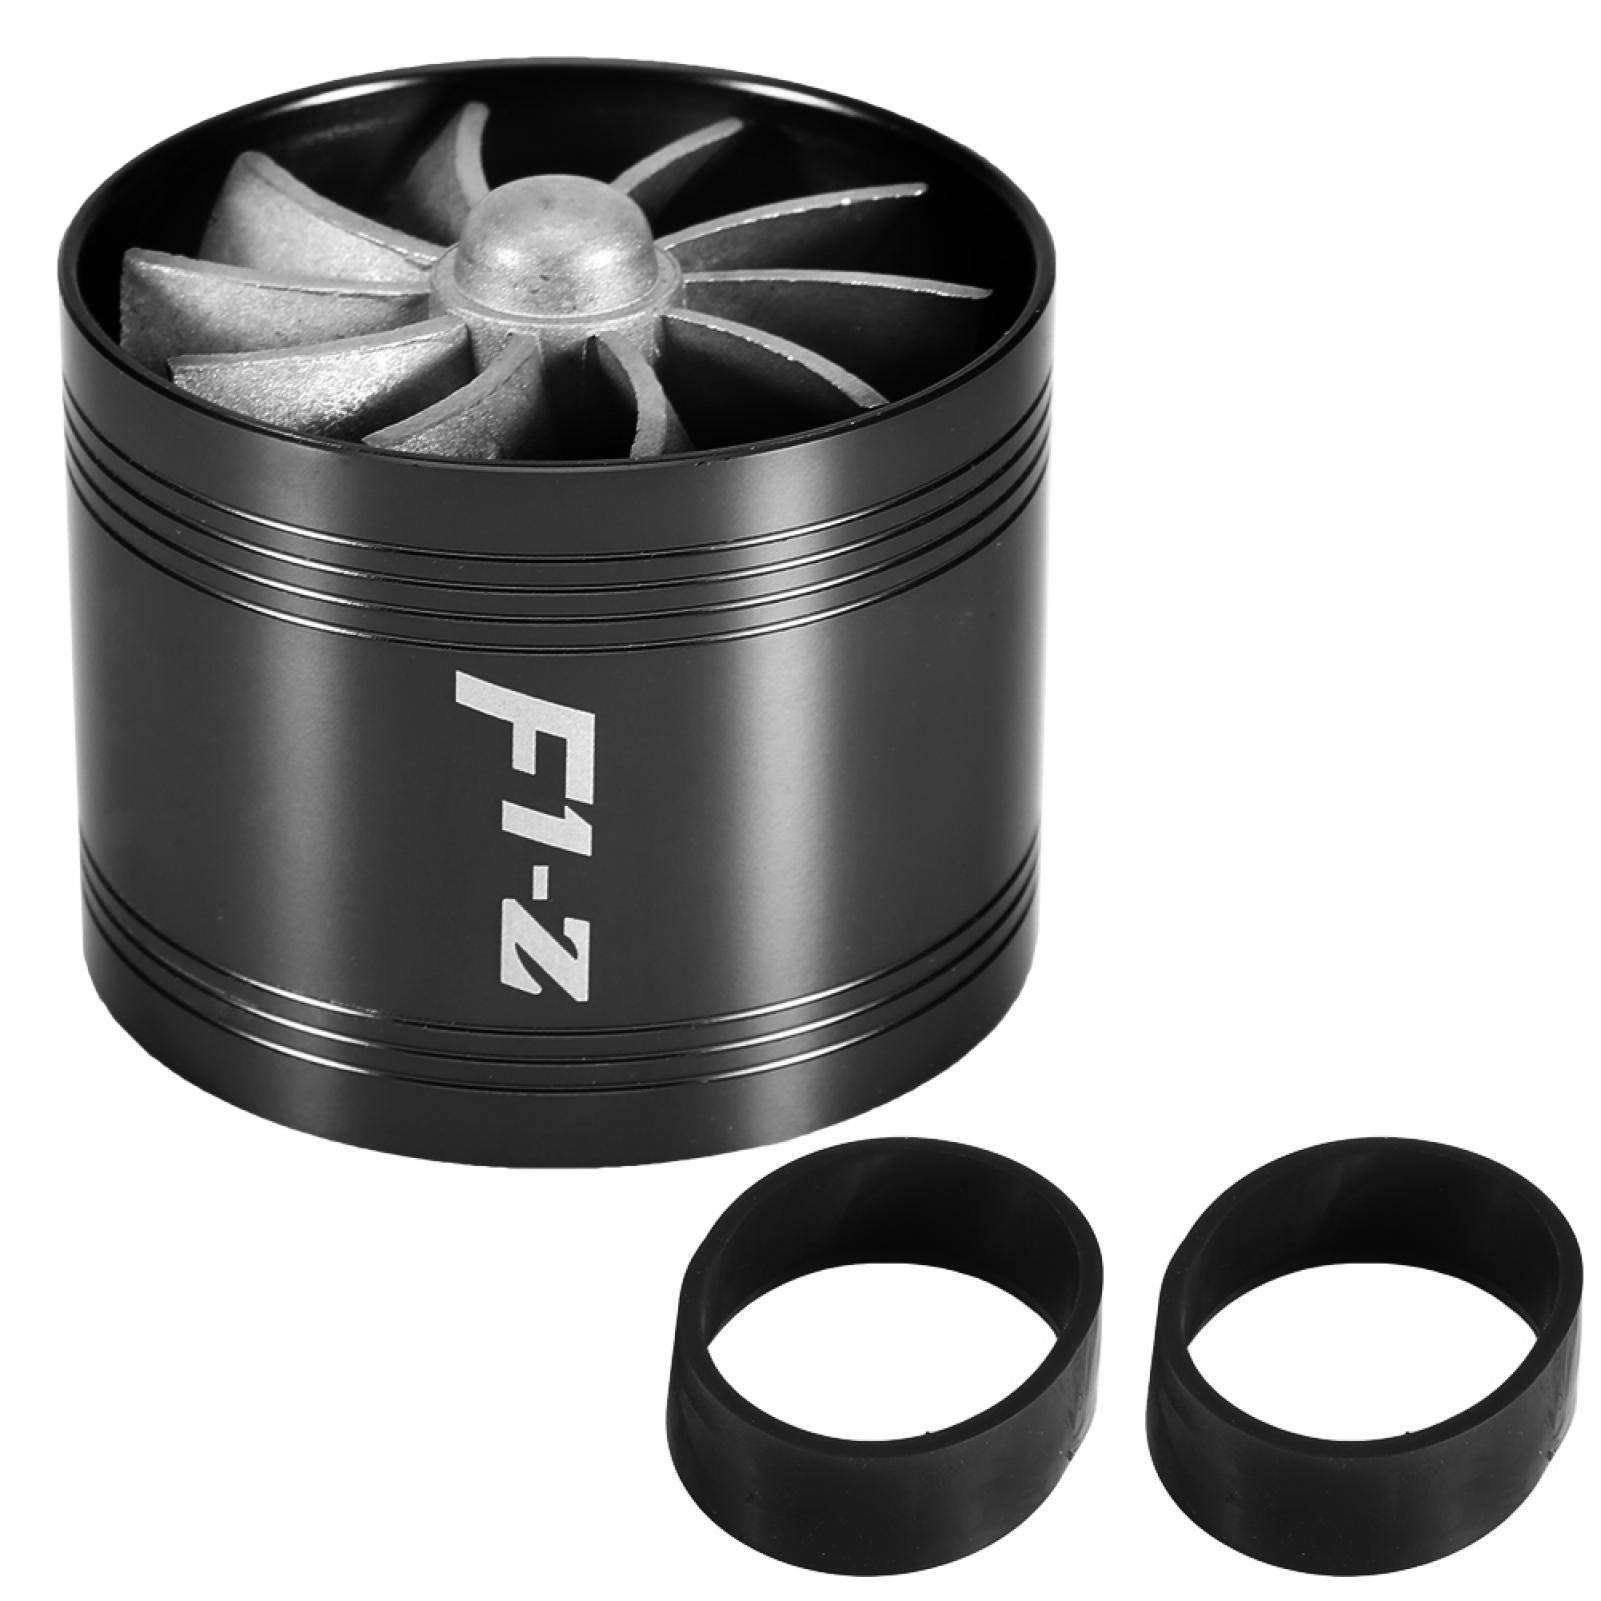 Air Intake Turbo, Auto Air Intake Turbonator Single Fan Super Charger Gas Fuel Saver Turbo 64mm(1) von Ouitble